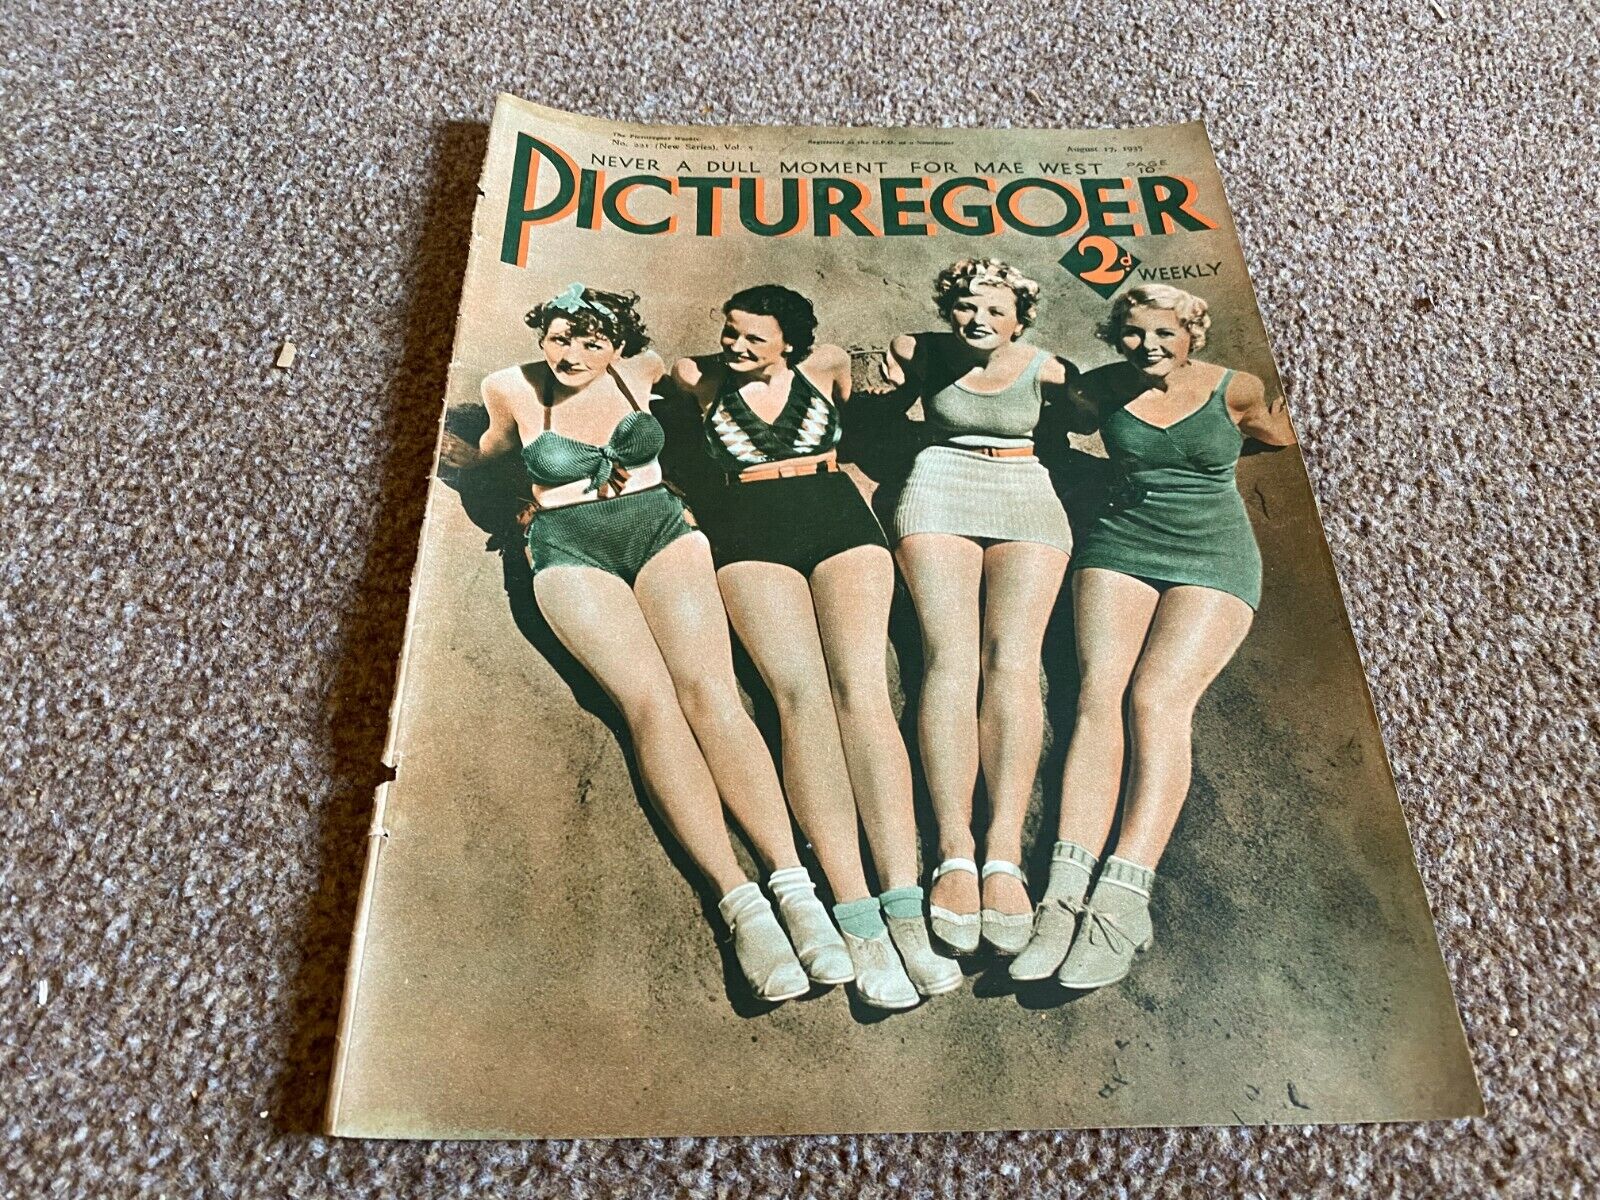 FTWB11 PICTUREGOER WEEKLY MAGAZINE COVER PAGE 12X9 17/8/1935